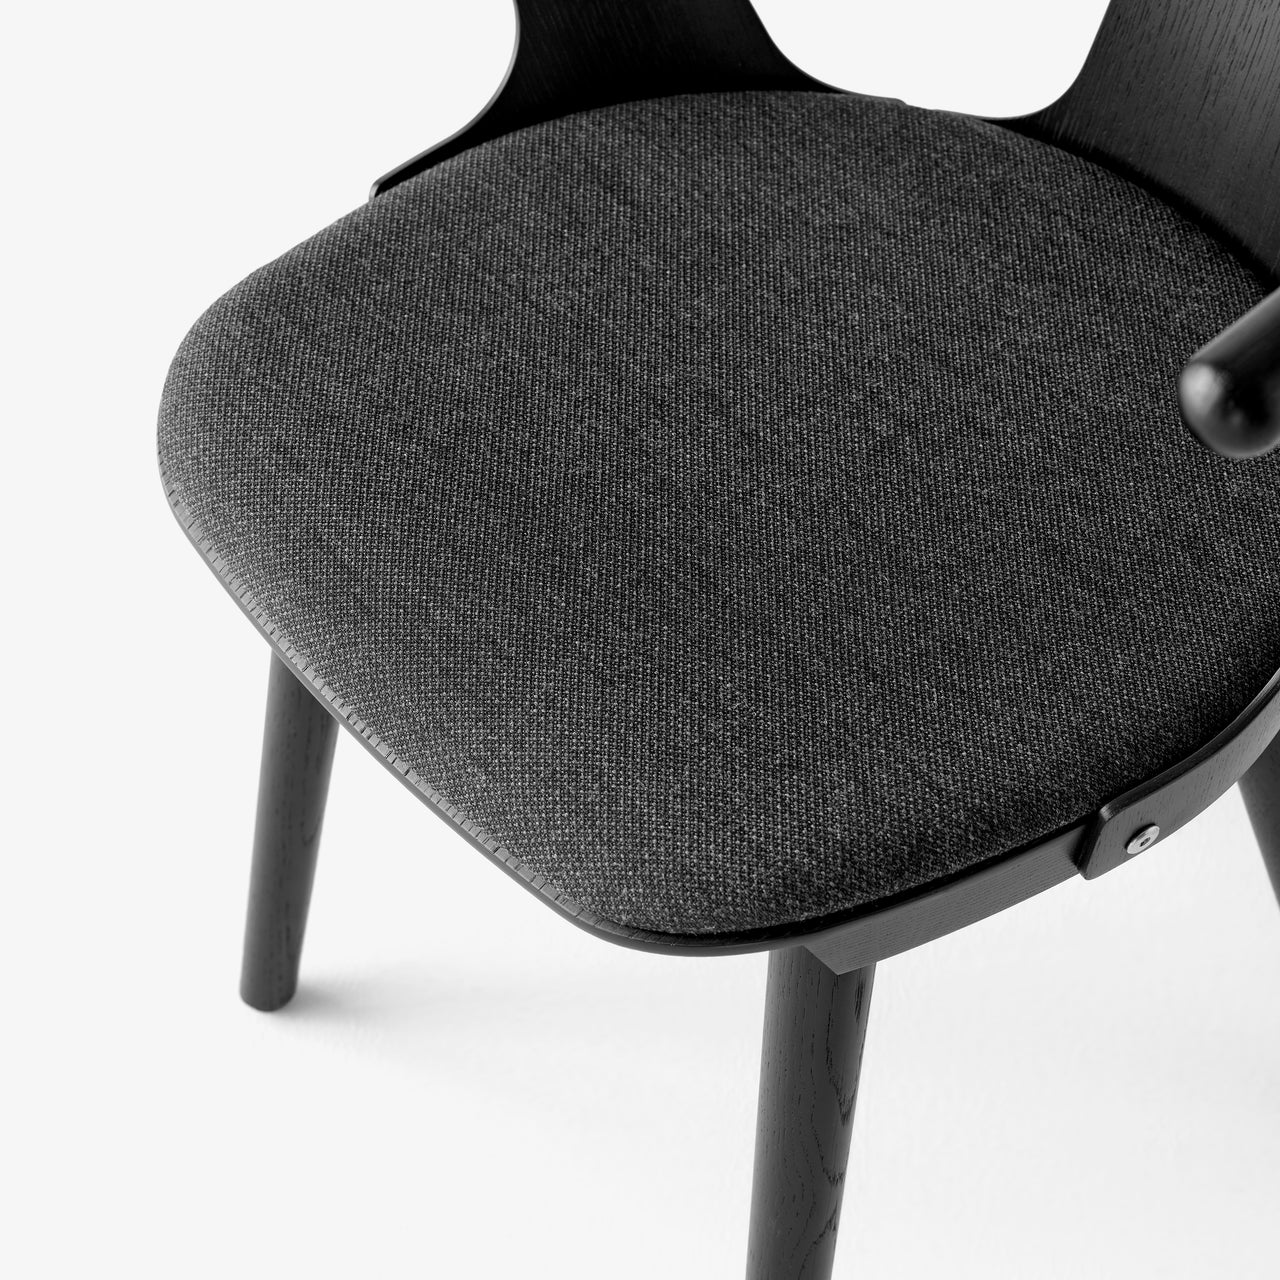 In Between Chair SK2: Upholstered